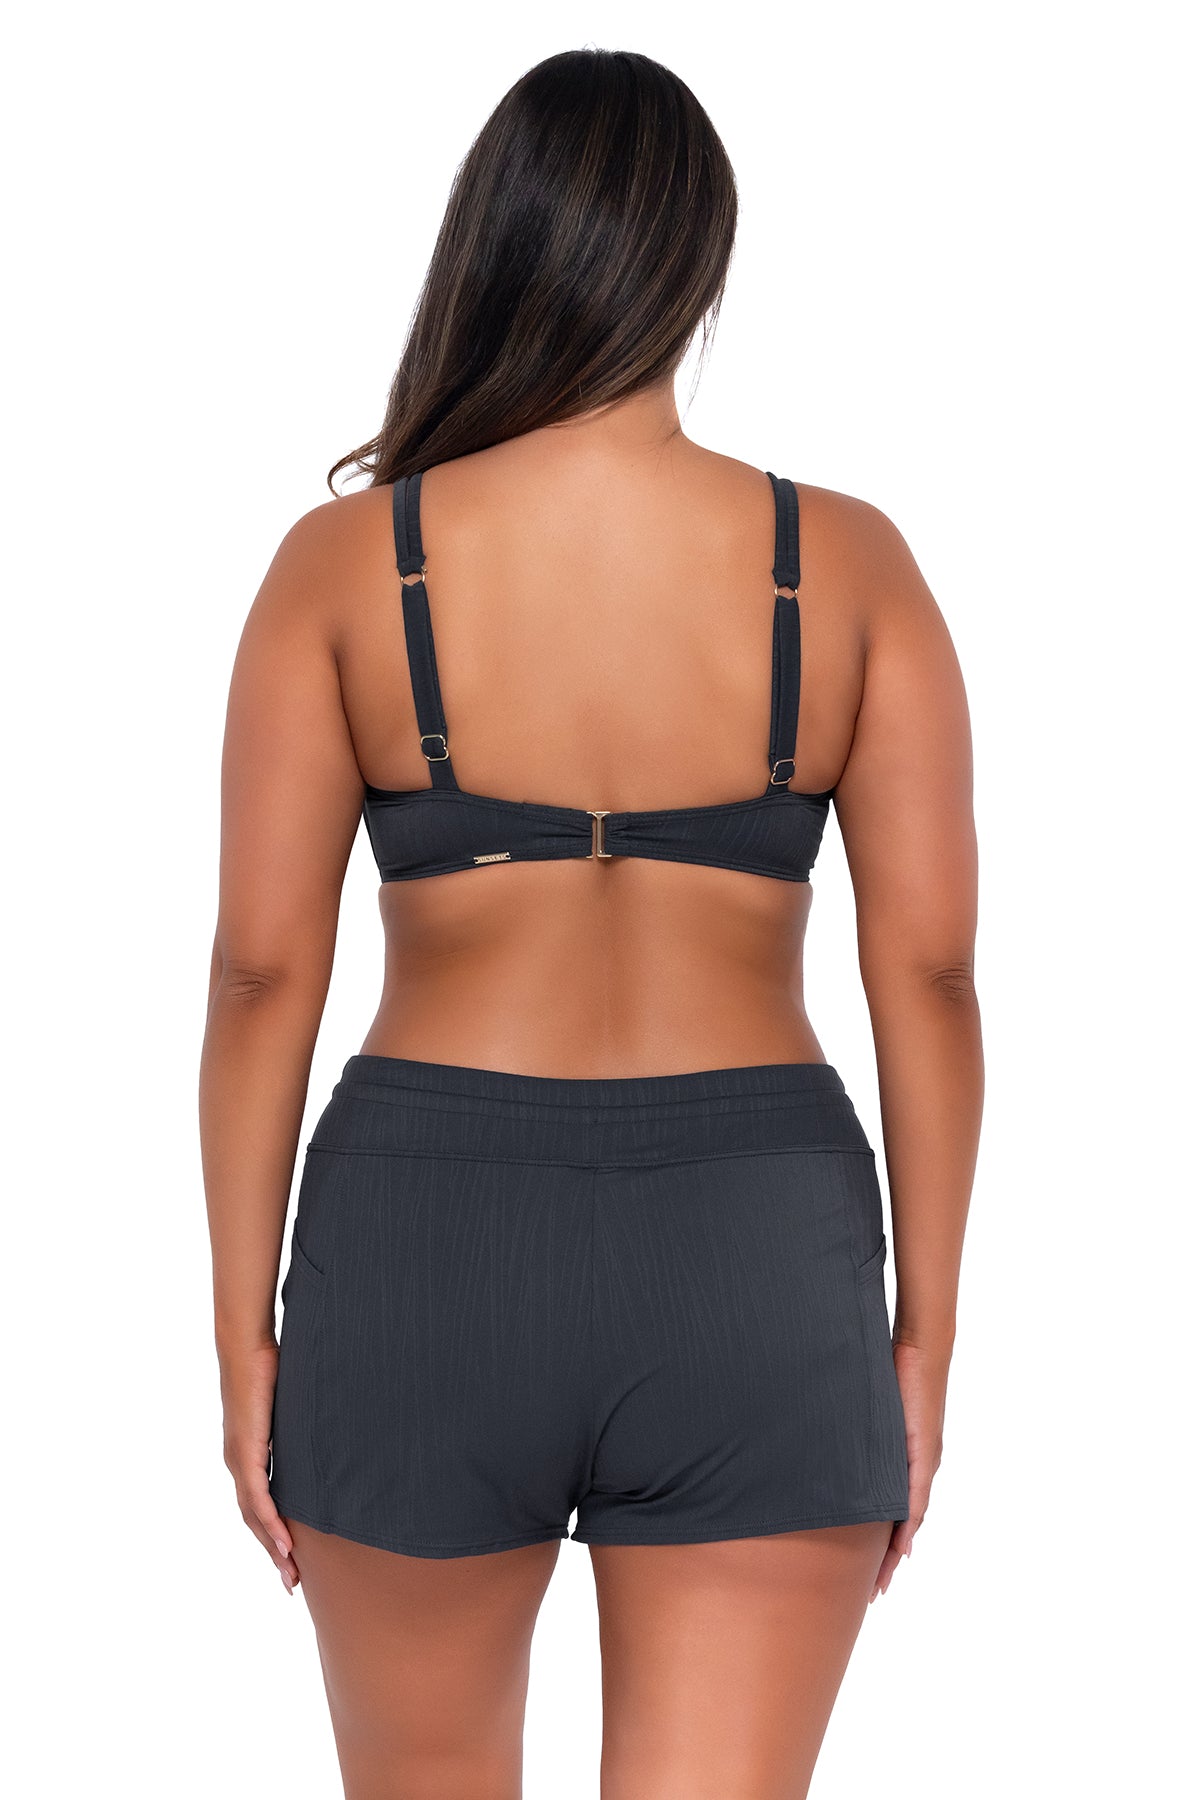 Back pose #1 of Nicky wearing Sunsets Slate Seagrass Texture Taylor Bralette Top with matching Laguna Swim Short